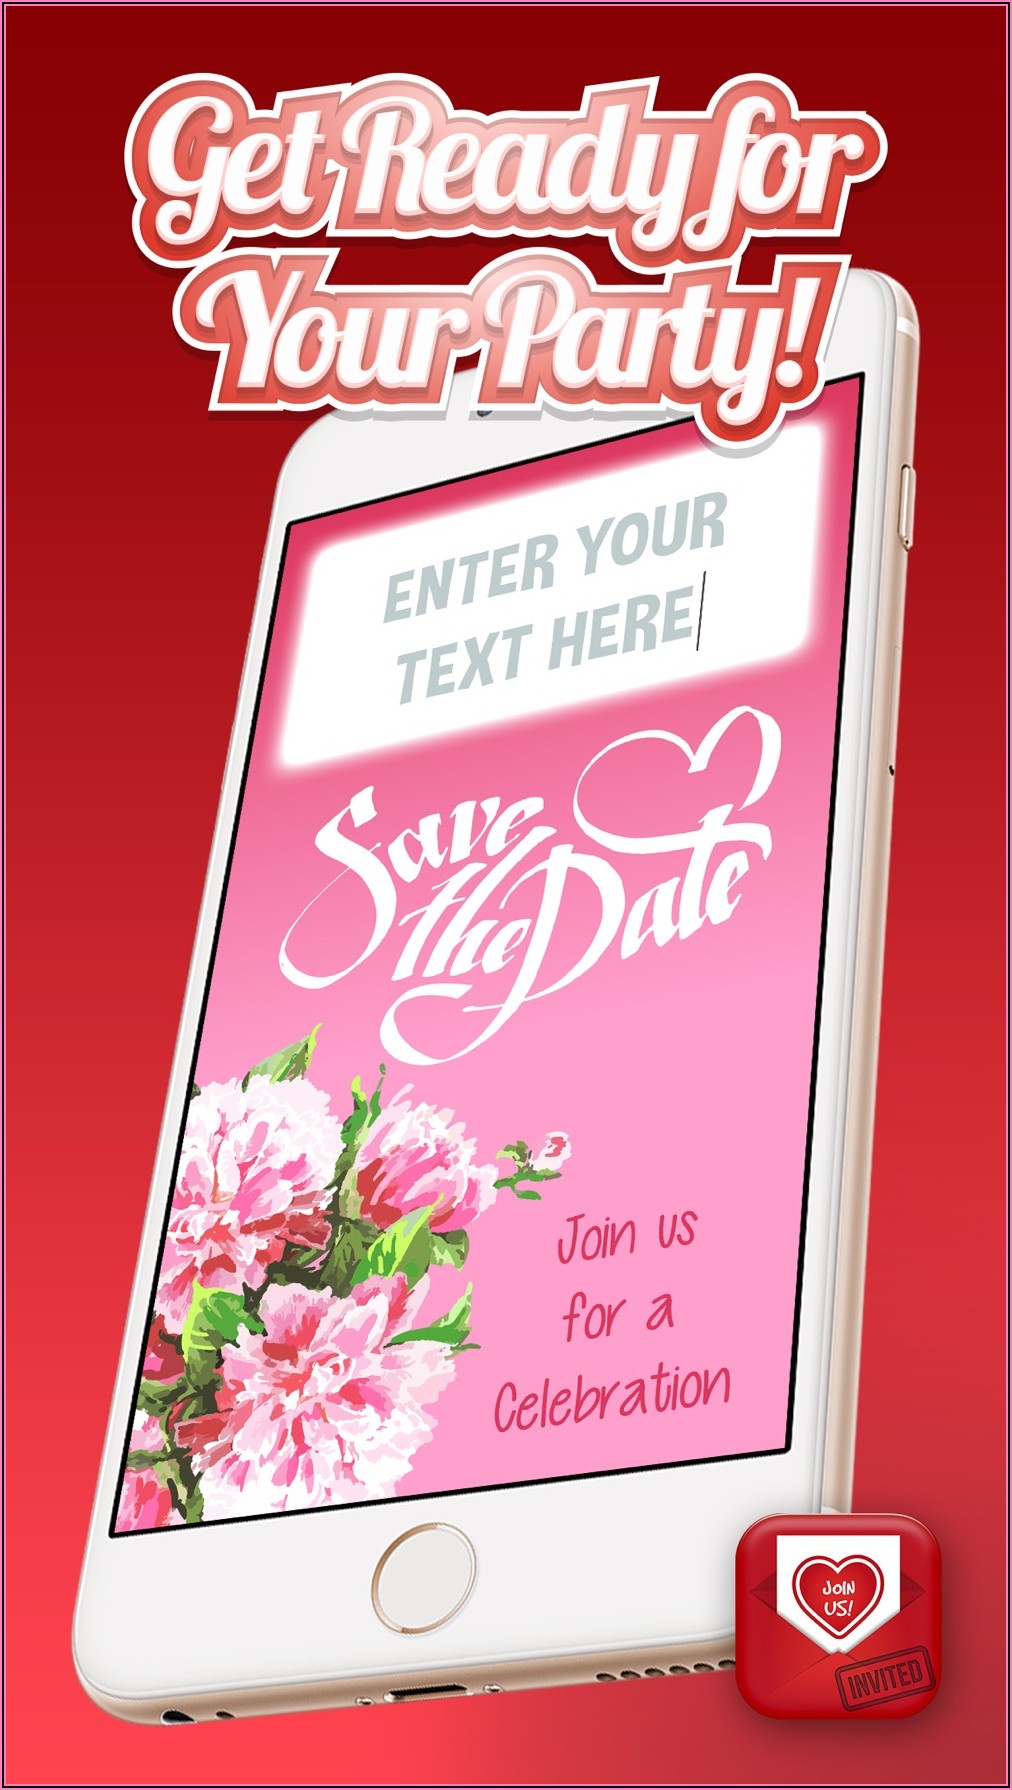 Best Free Iphone App To Make Invitations